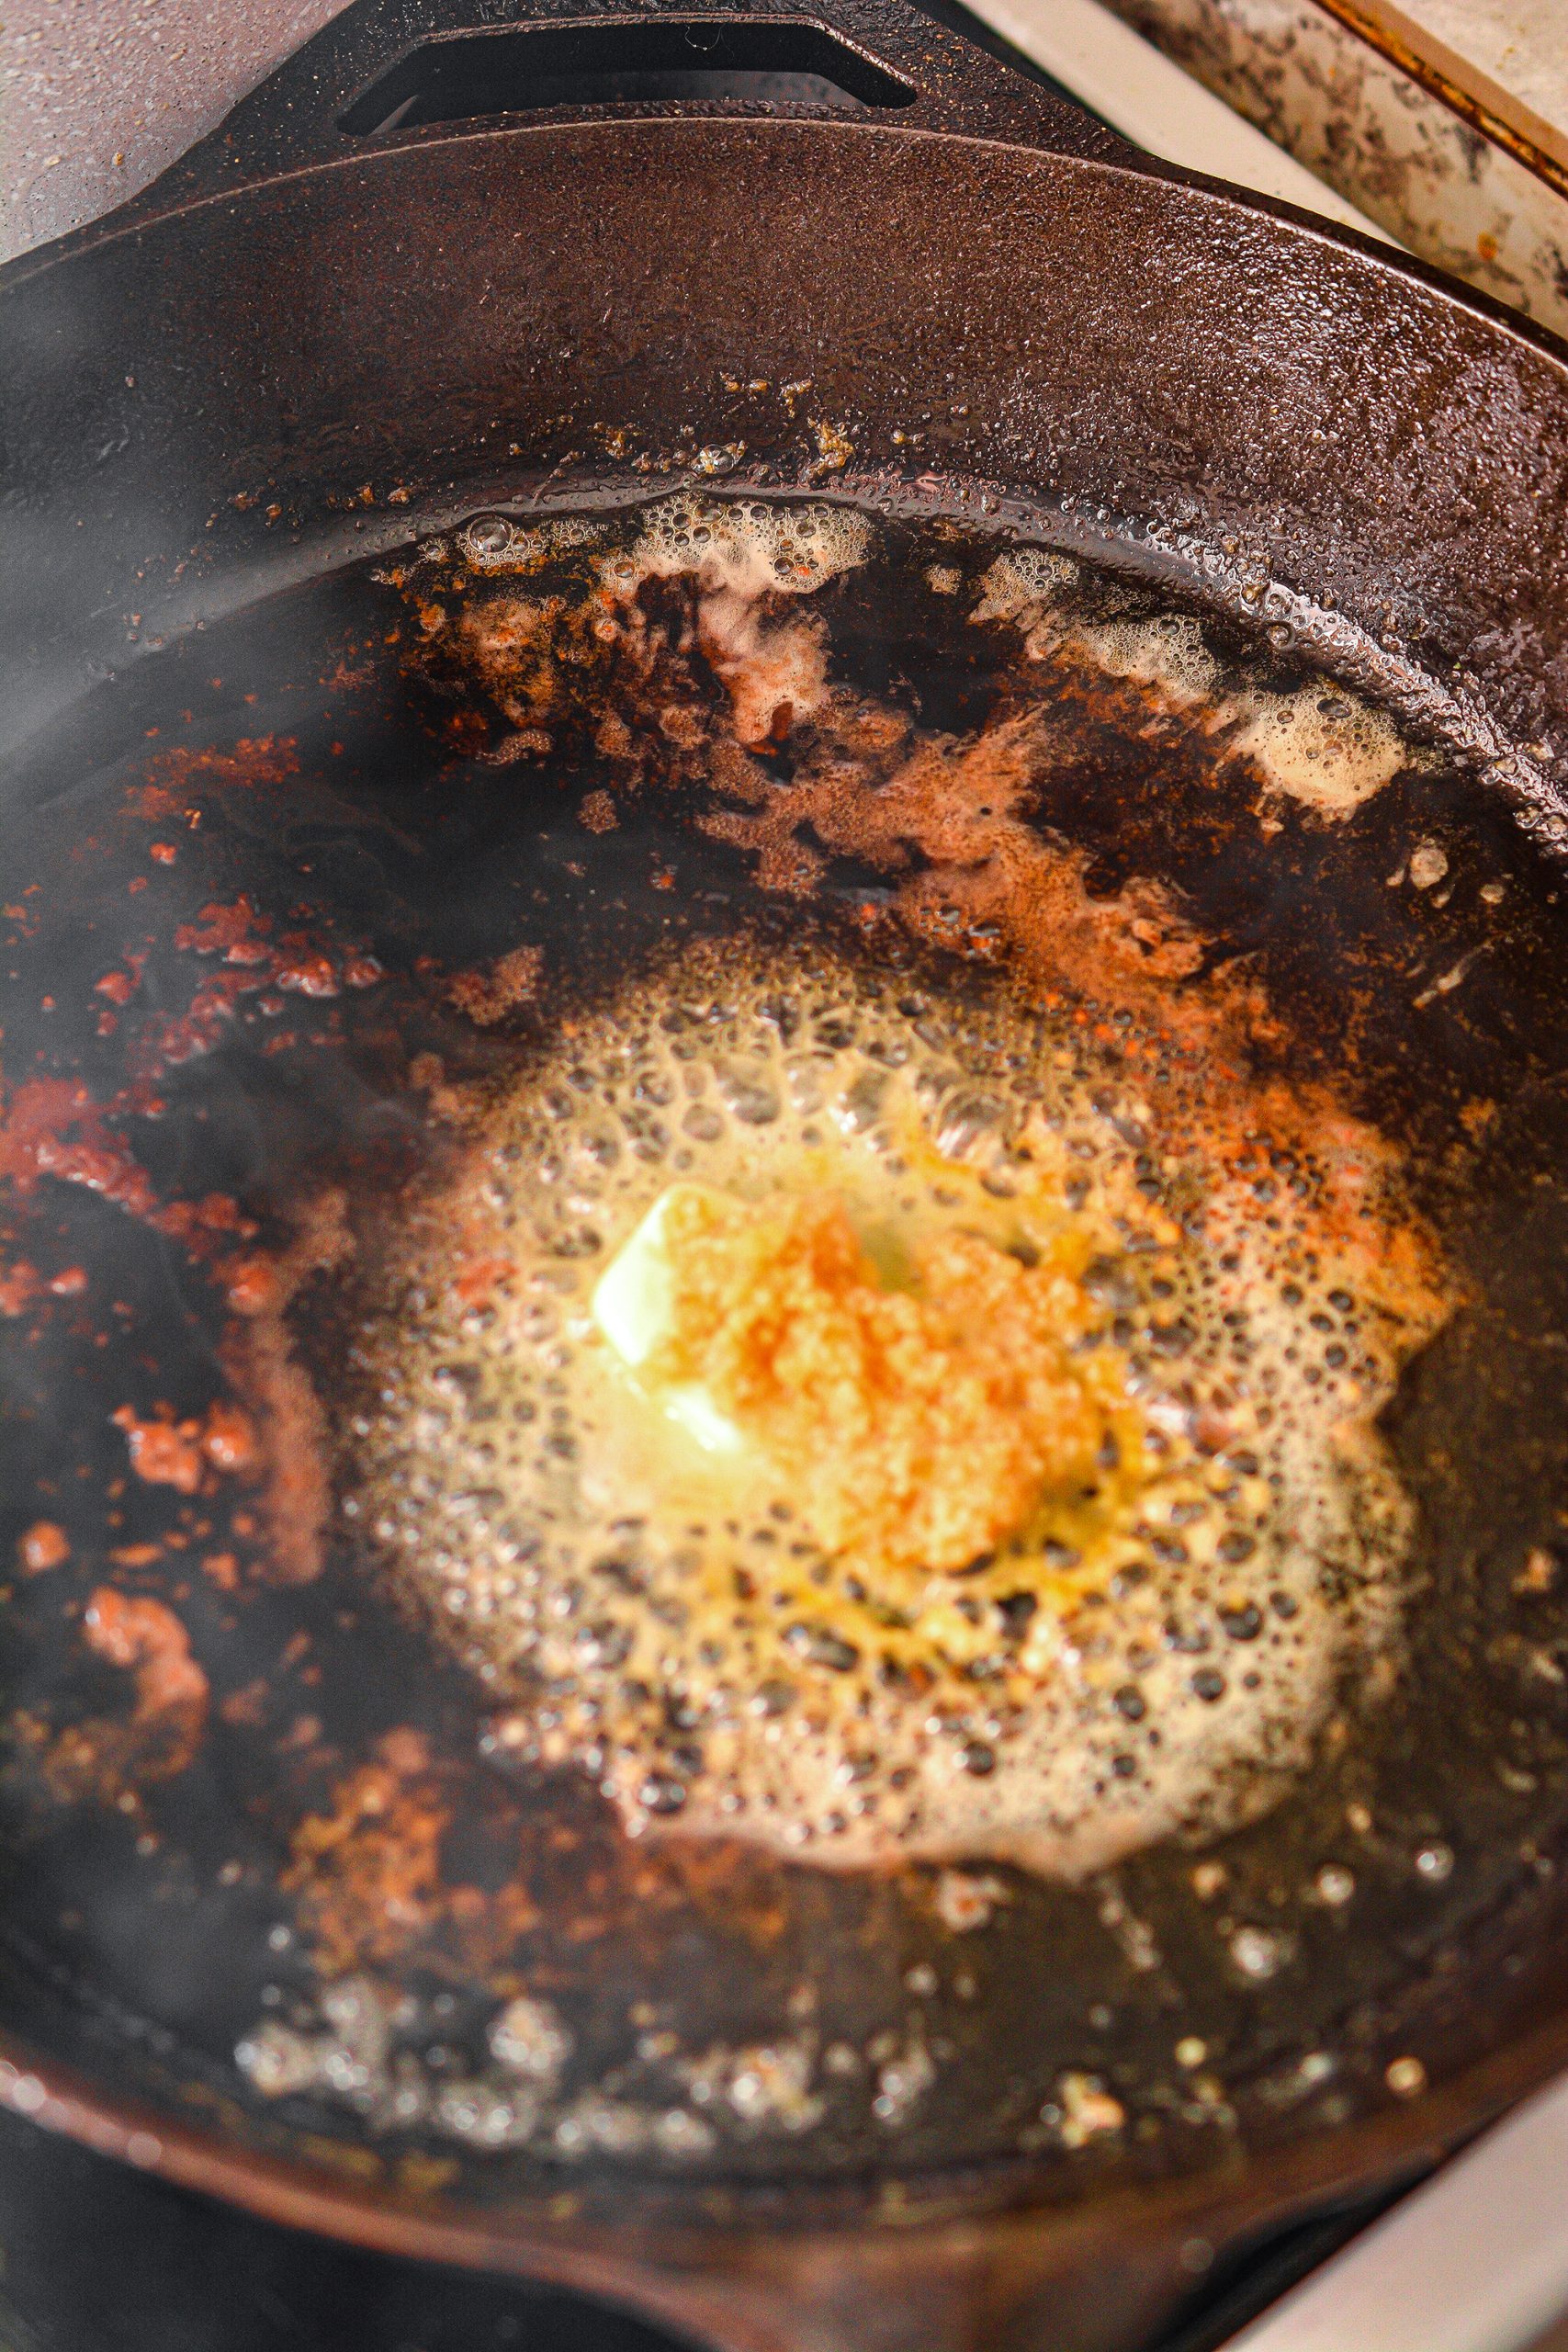 Remove the extra oil and grease from the skillet and return it to the stove over medium heat.